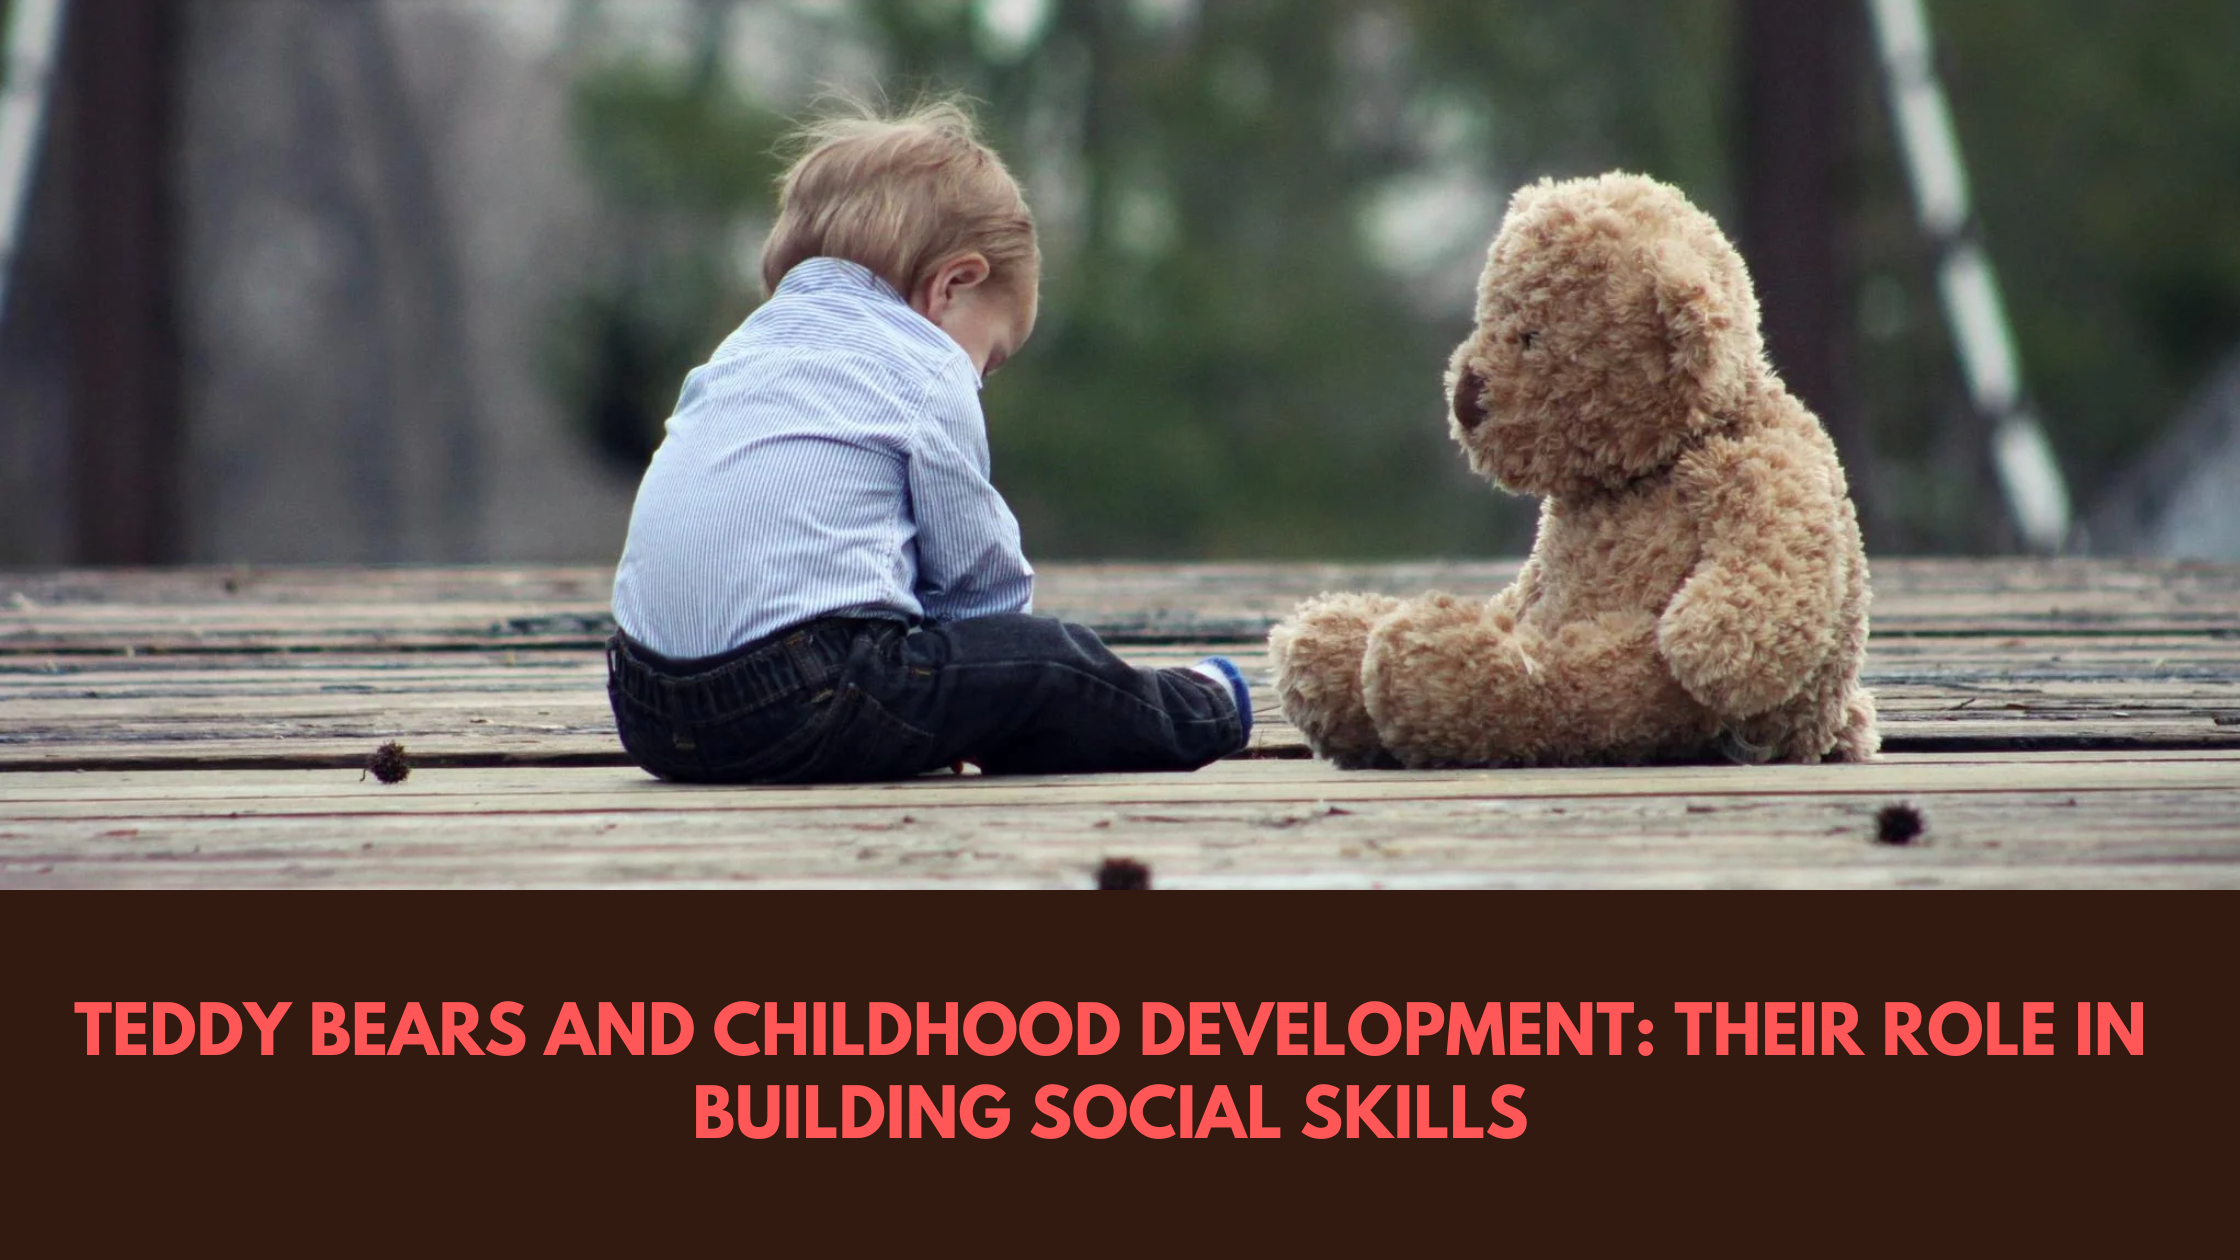 Teddy Bears and Childhood Development: Their Role in Building Social Skills